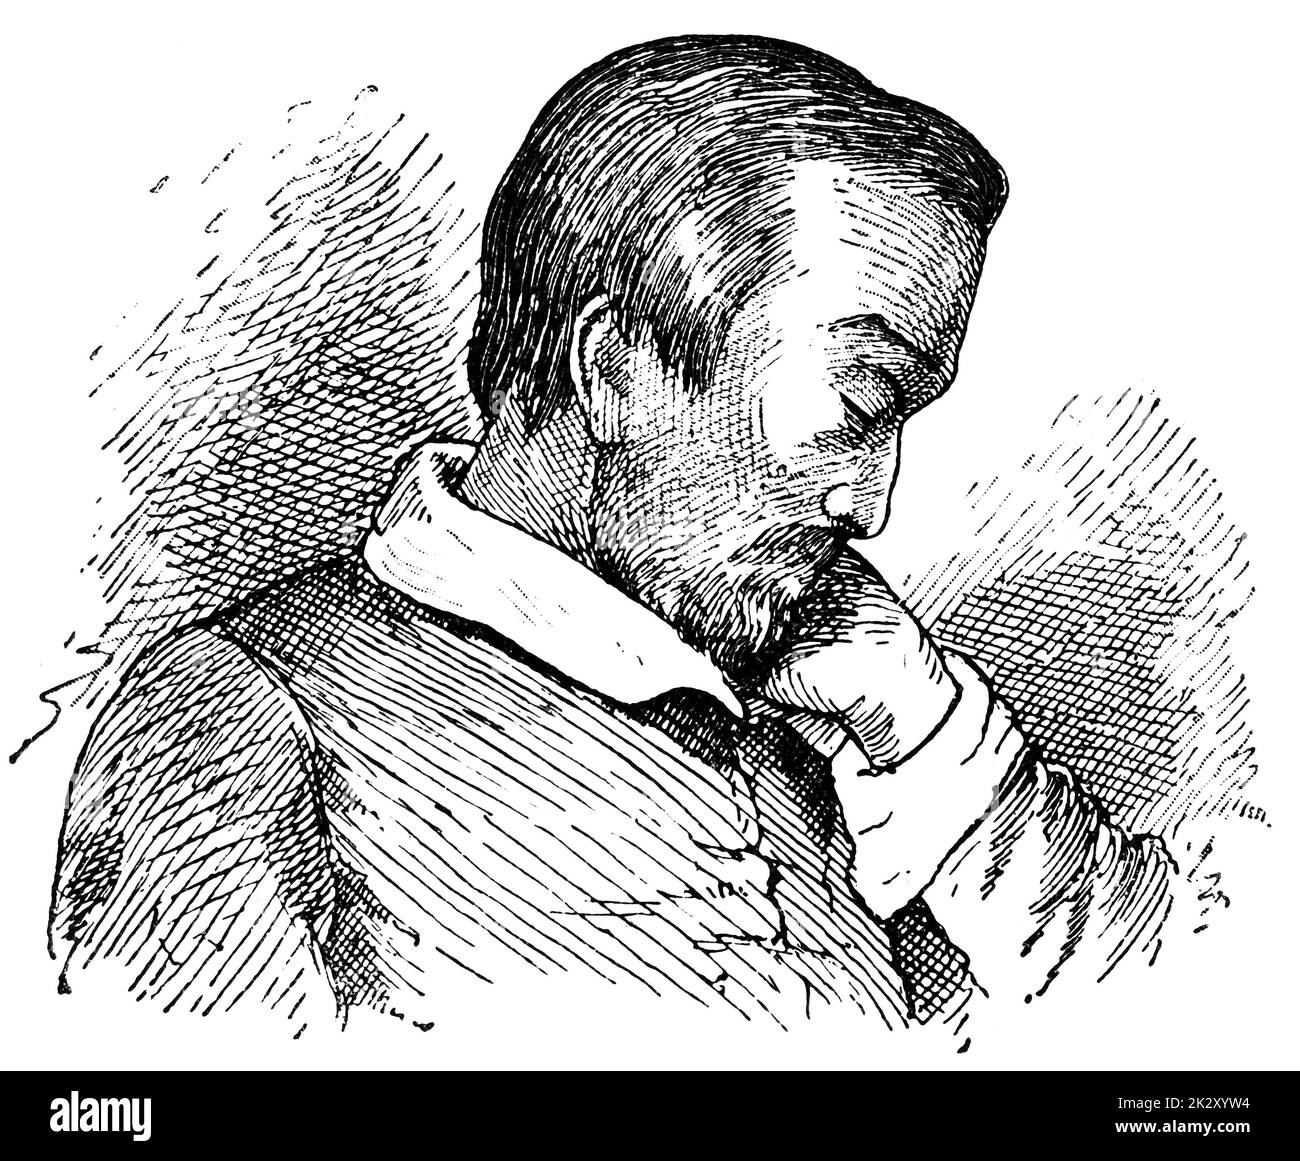 Portrait of Heinrich Heine (in the last year of his life) - a German poet, writer and literary critic. Illustration of the 19th century. White background. Stock Photo